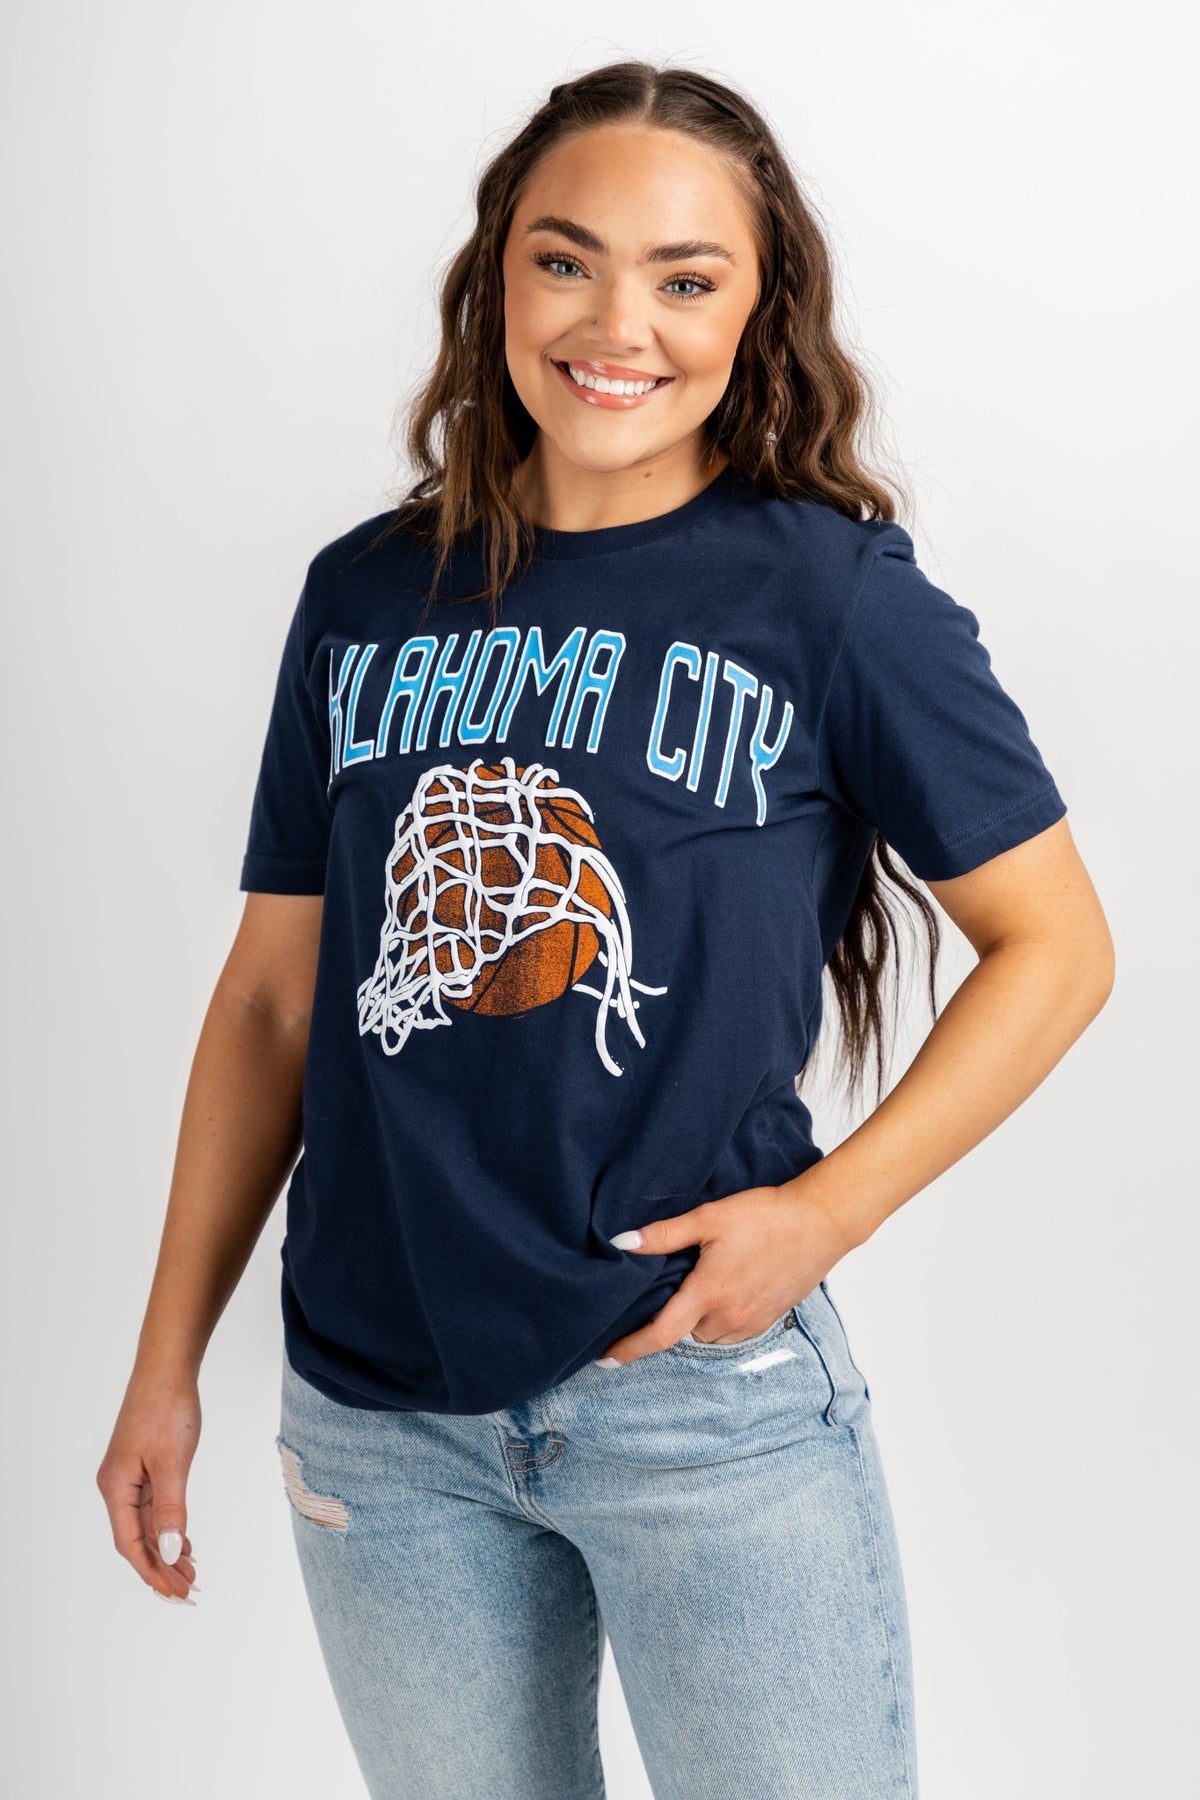 OKC fling unisex t-shirt navy - Cute T-shirts - Trendy Graphic T-Shirts at Lush Fashion Lounge Boutique in Oklahoma City